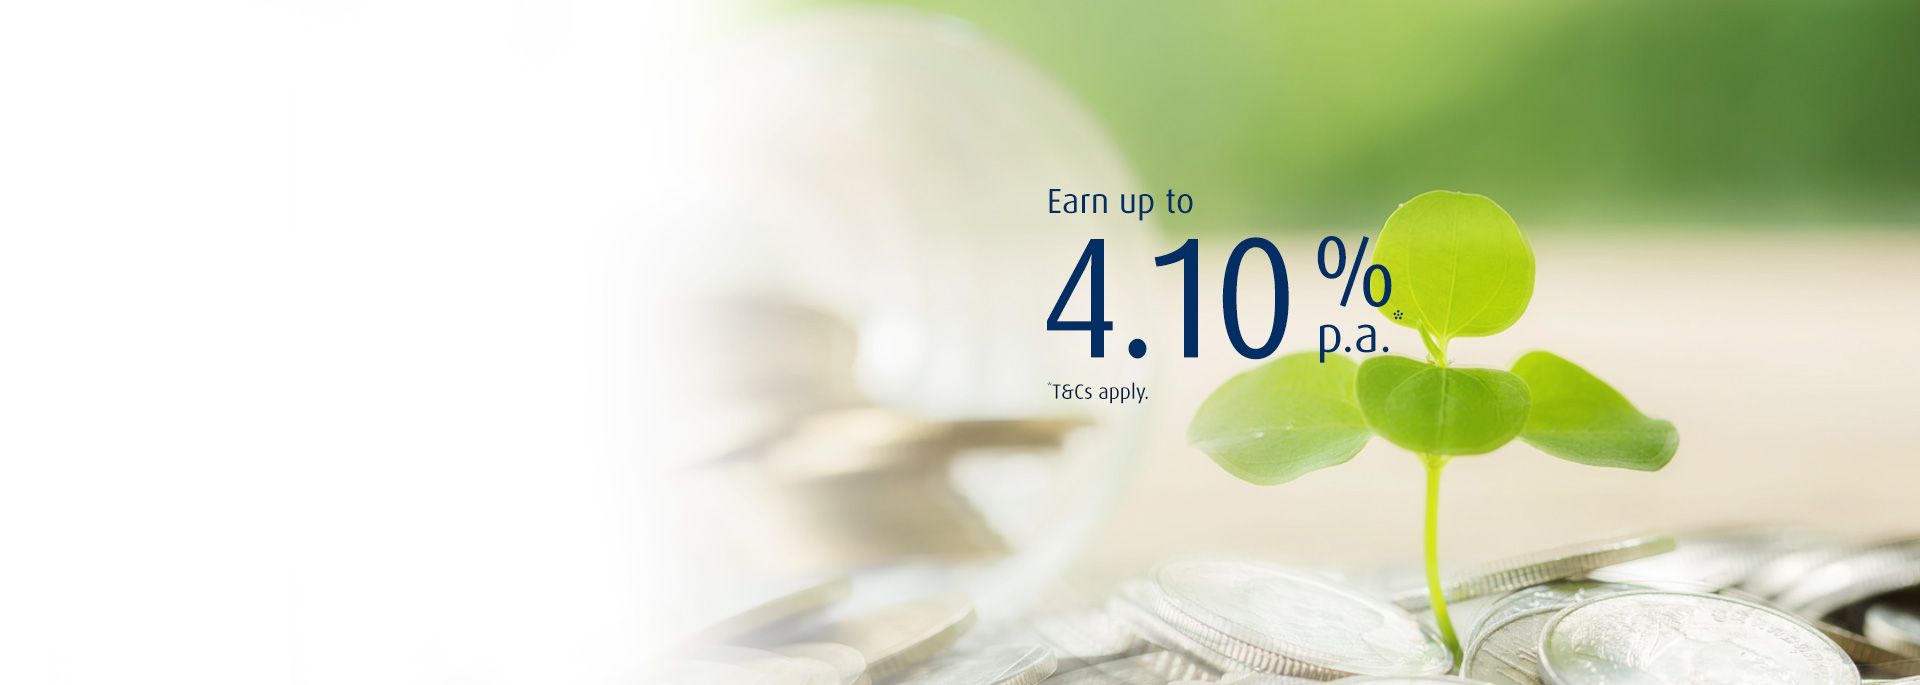 Text 'Earn up to 4.10% p.a.' over background of a young sapling growing from plenty of coins